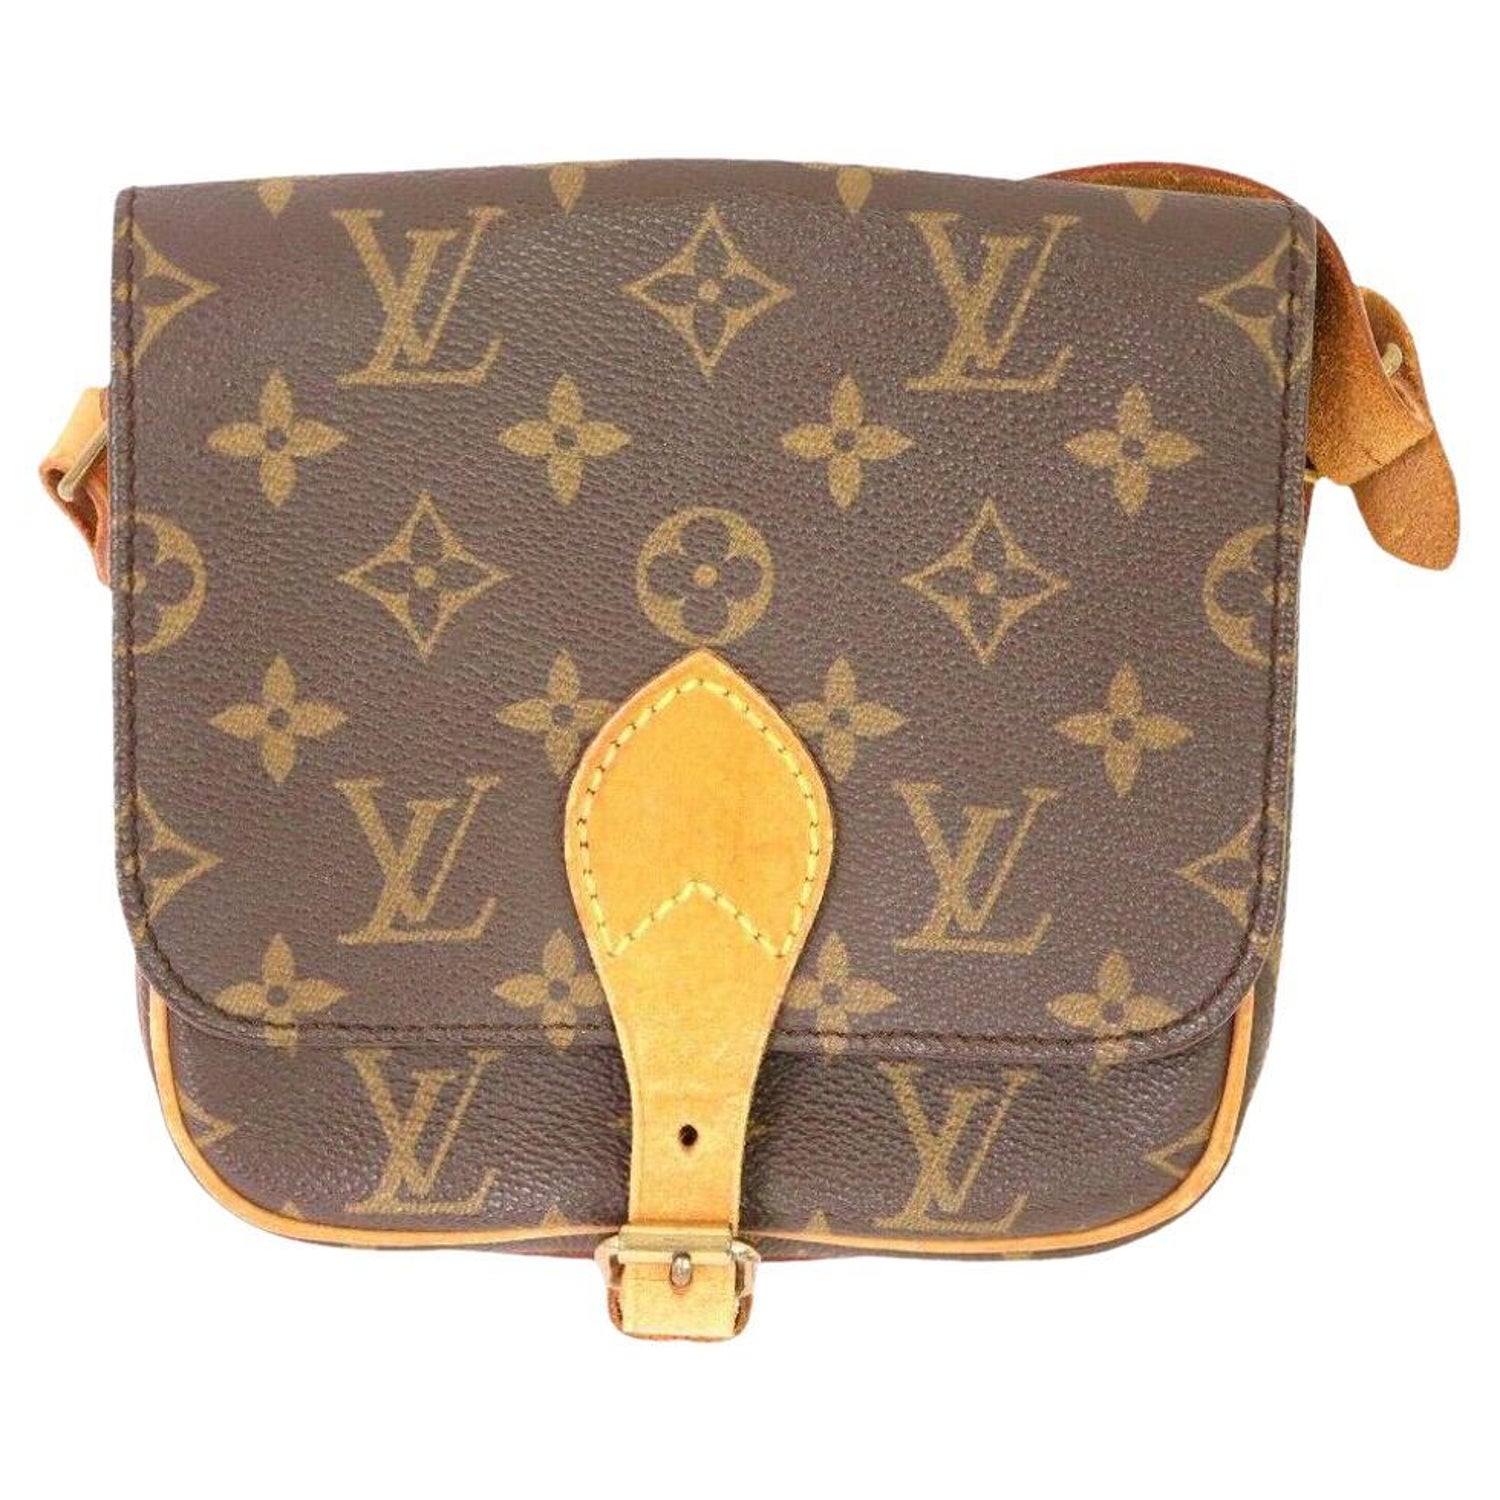 Sold at Auction: A handbag marked Louis Vuitton with chain/belted strap &  coin purse